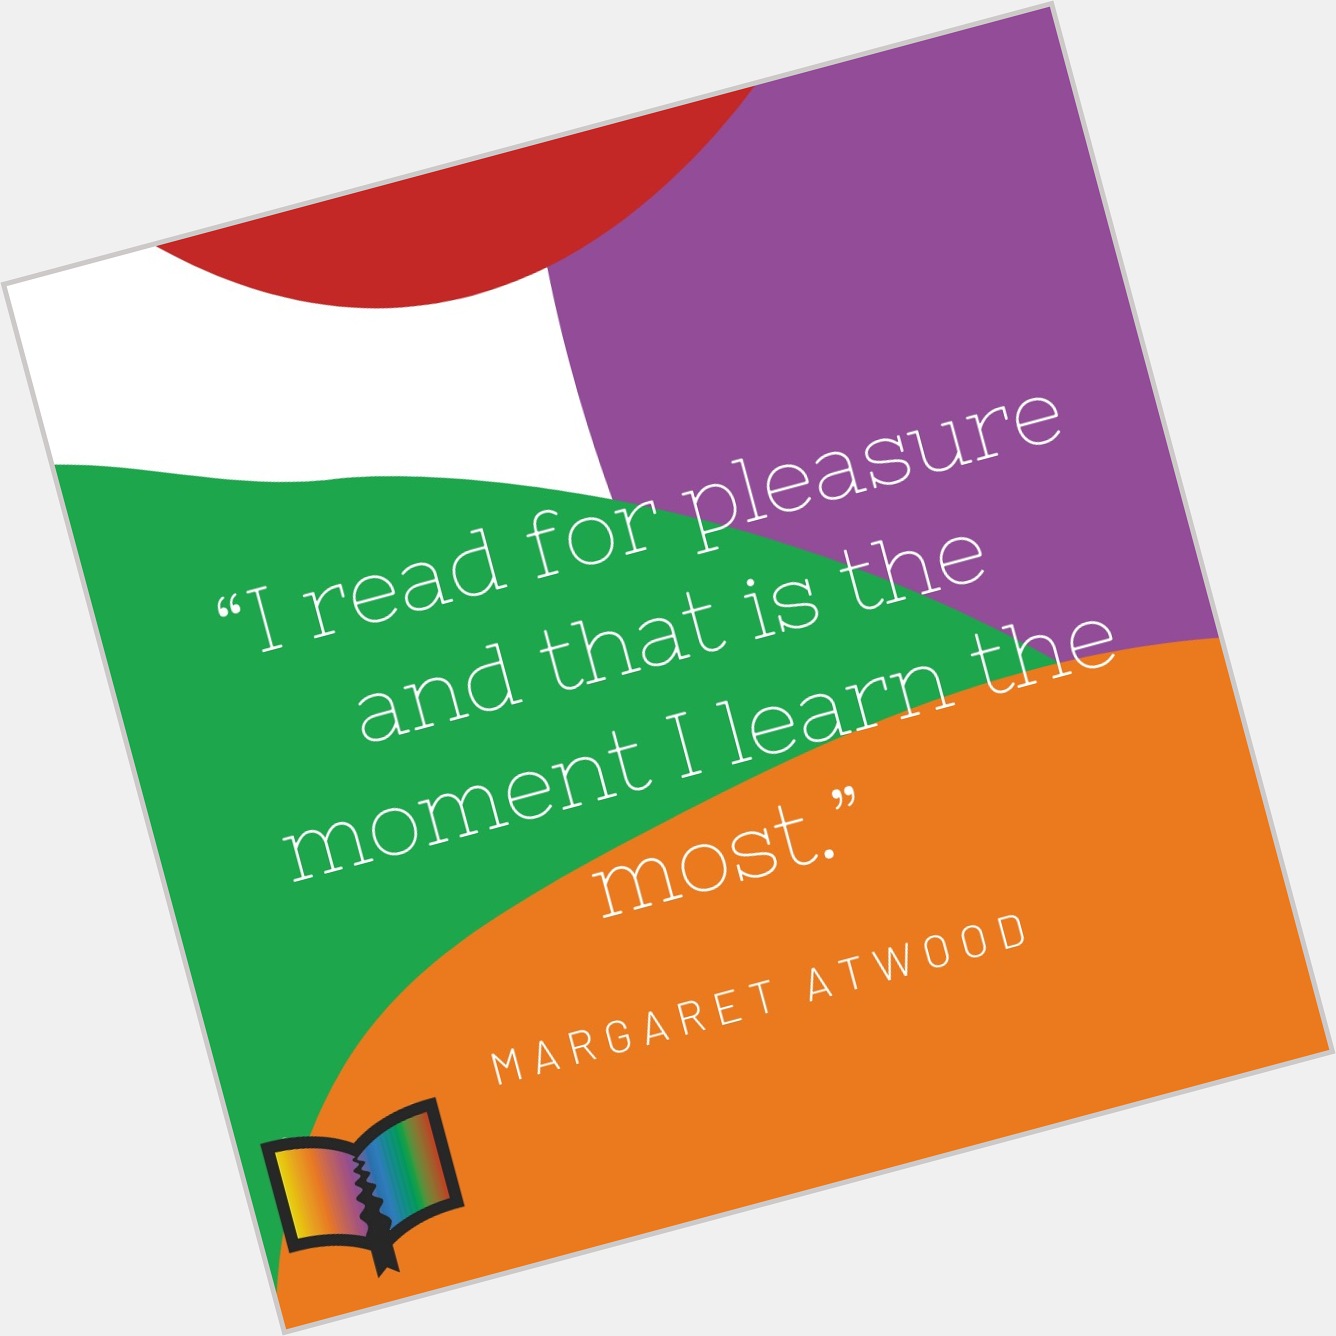 Happy birthday, Margaret Atwood! The famous poet and novelist is 80 years old today. 